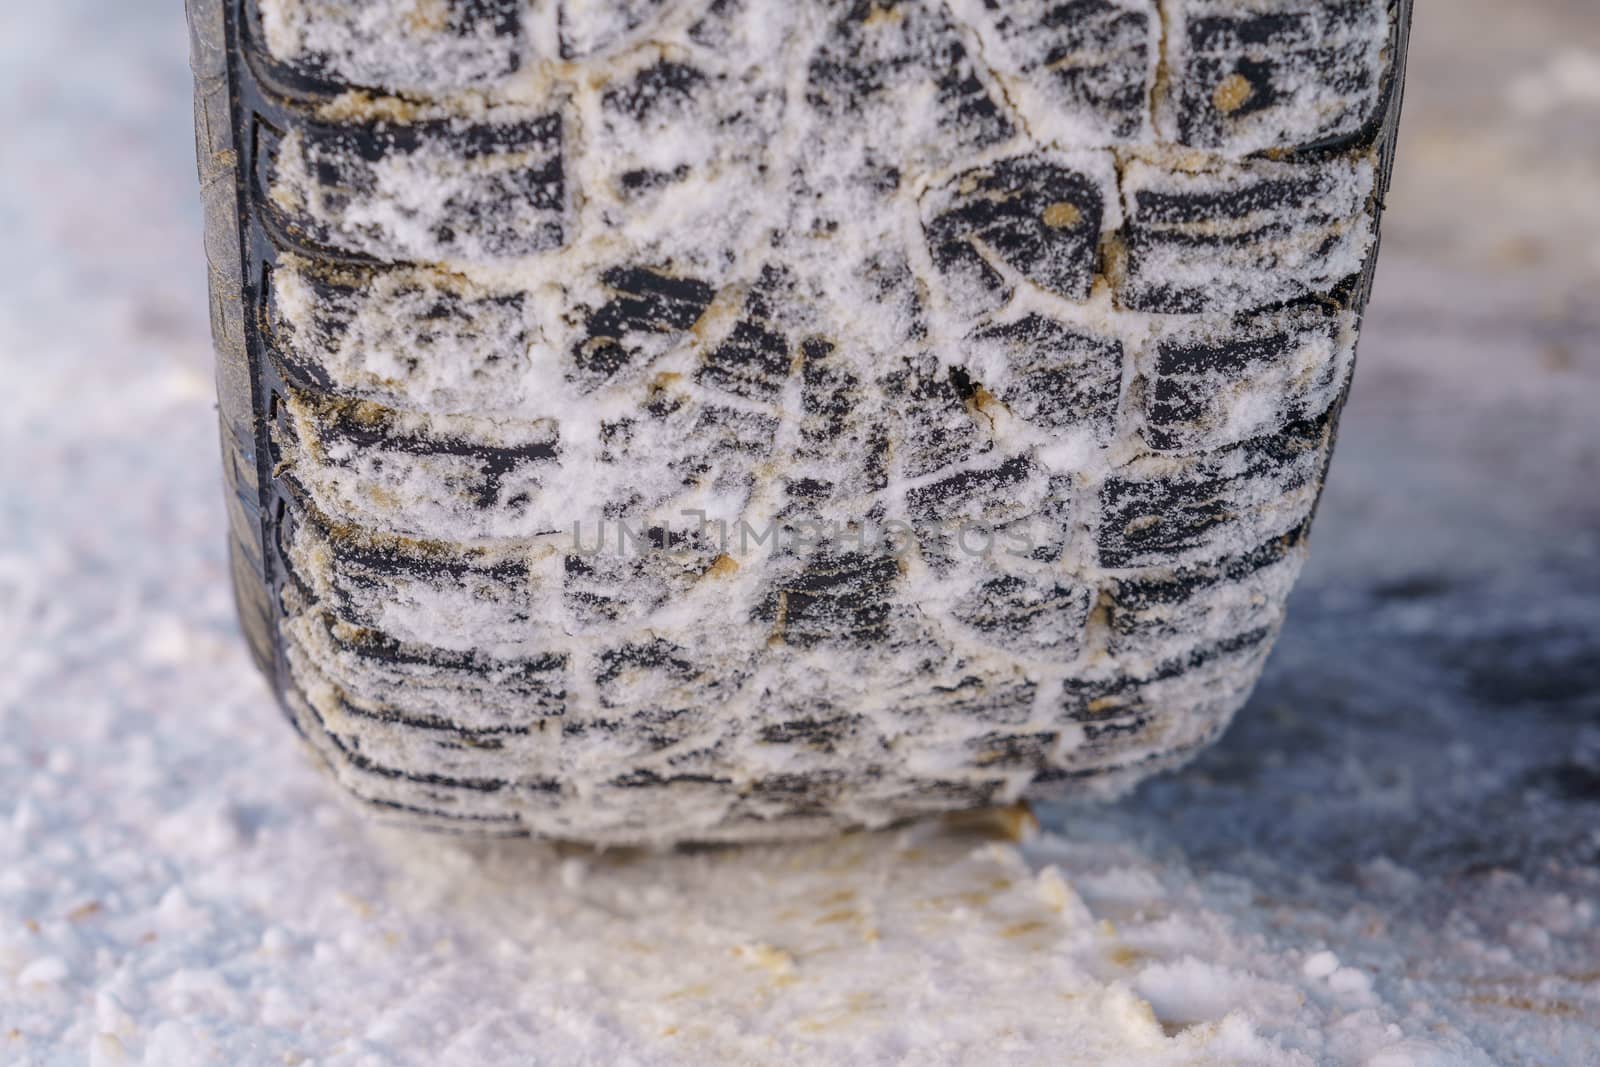 Tire for winter with spikes and its imprint on the road covered with snow